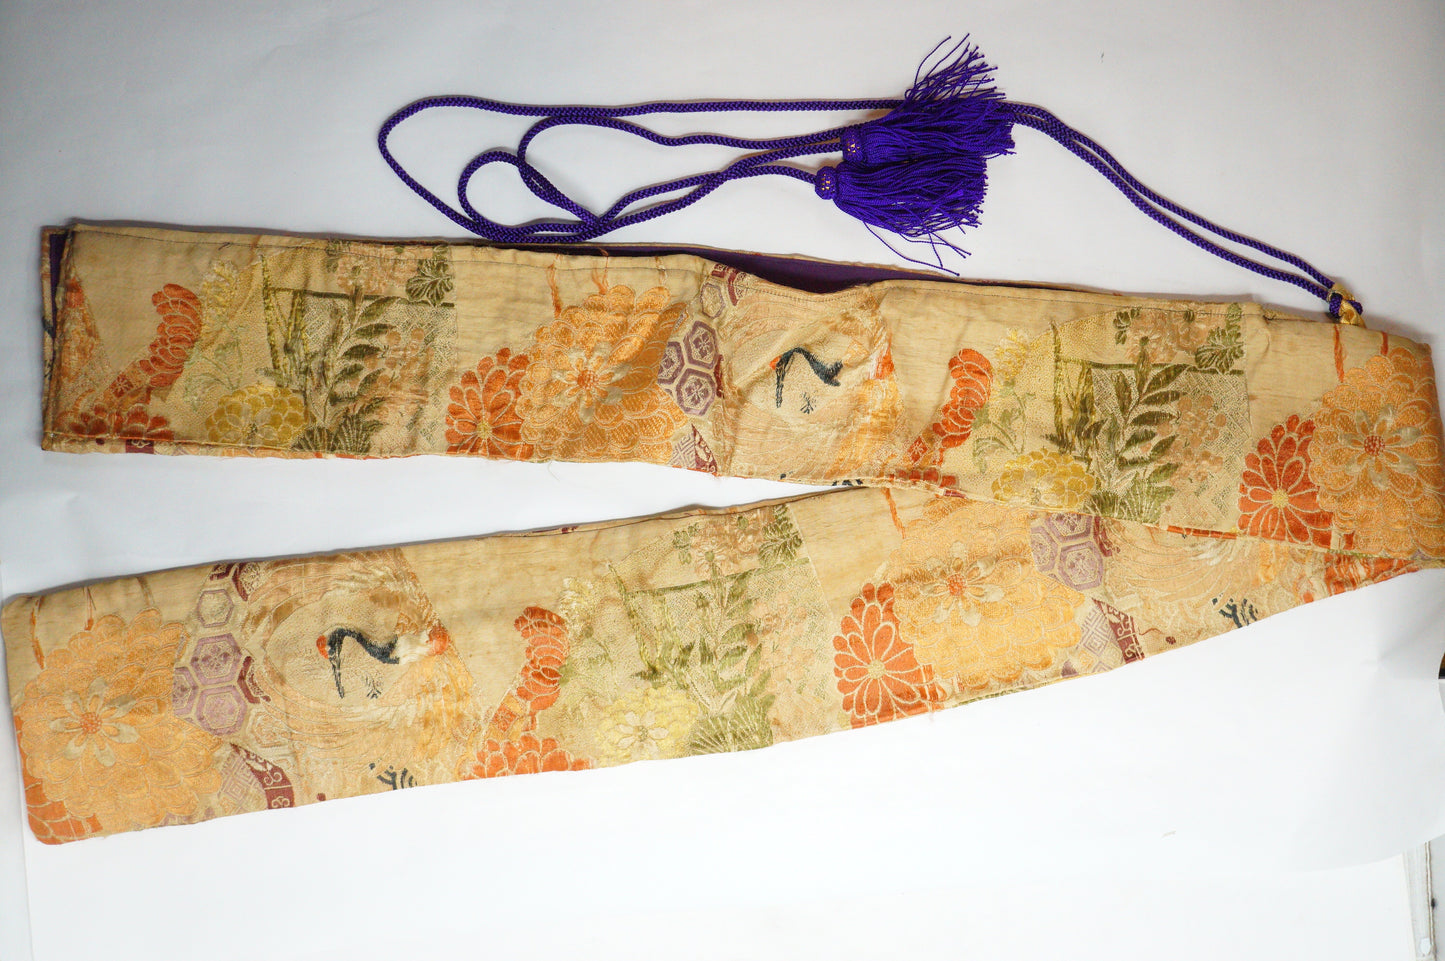 Japanese Vintage Weapon Bag made of Kimono Fabric from Japan 0110E4